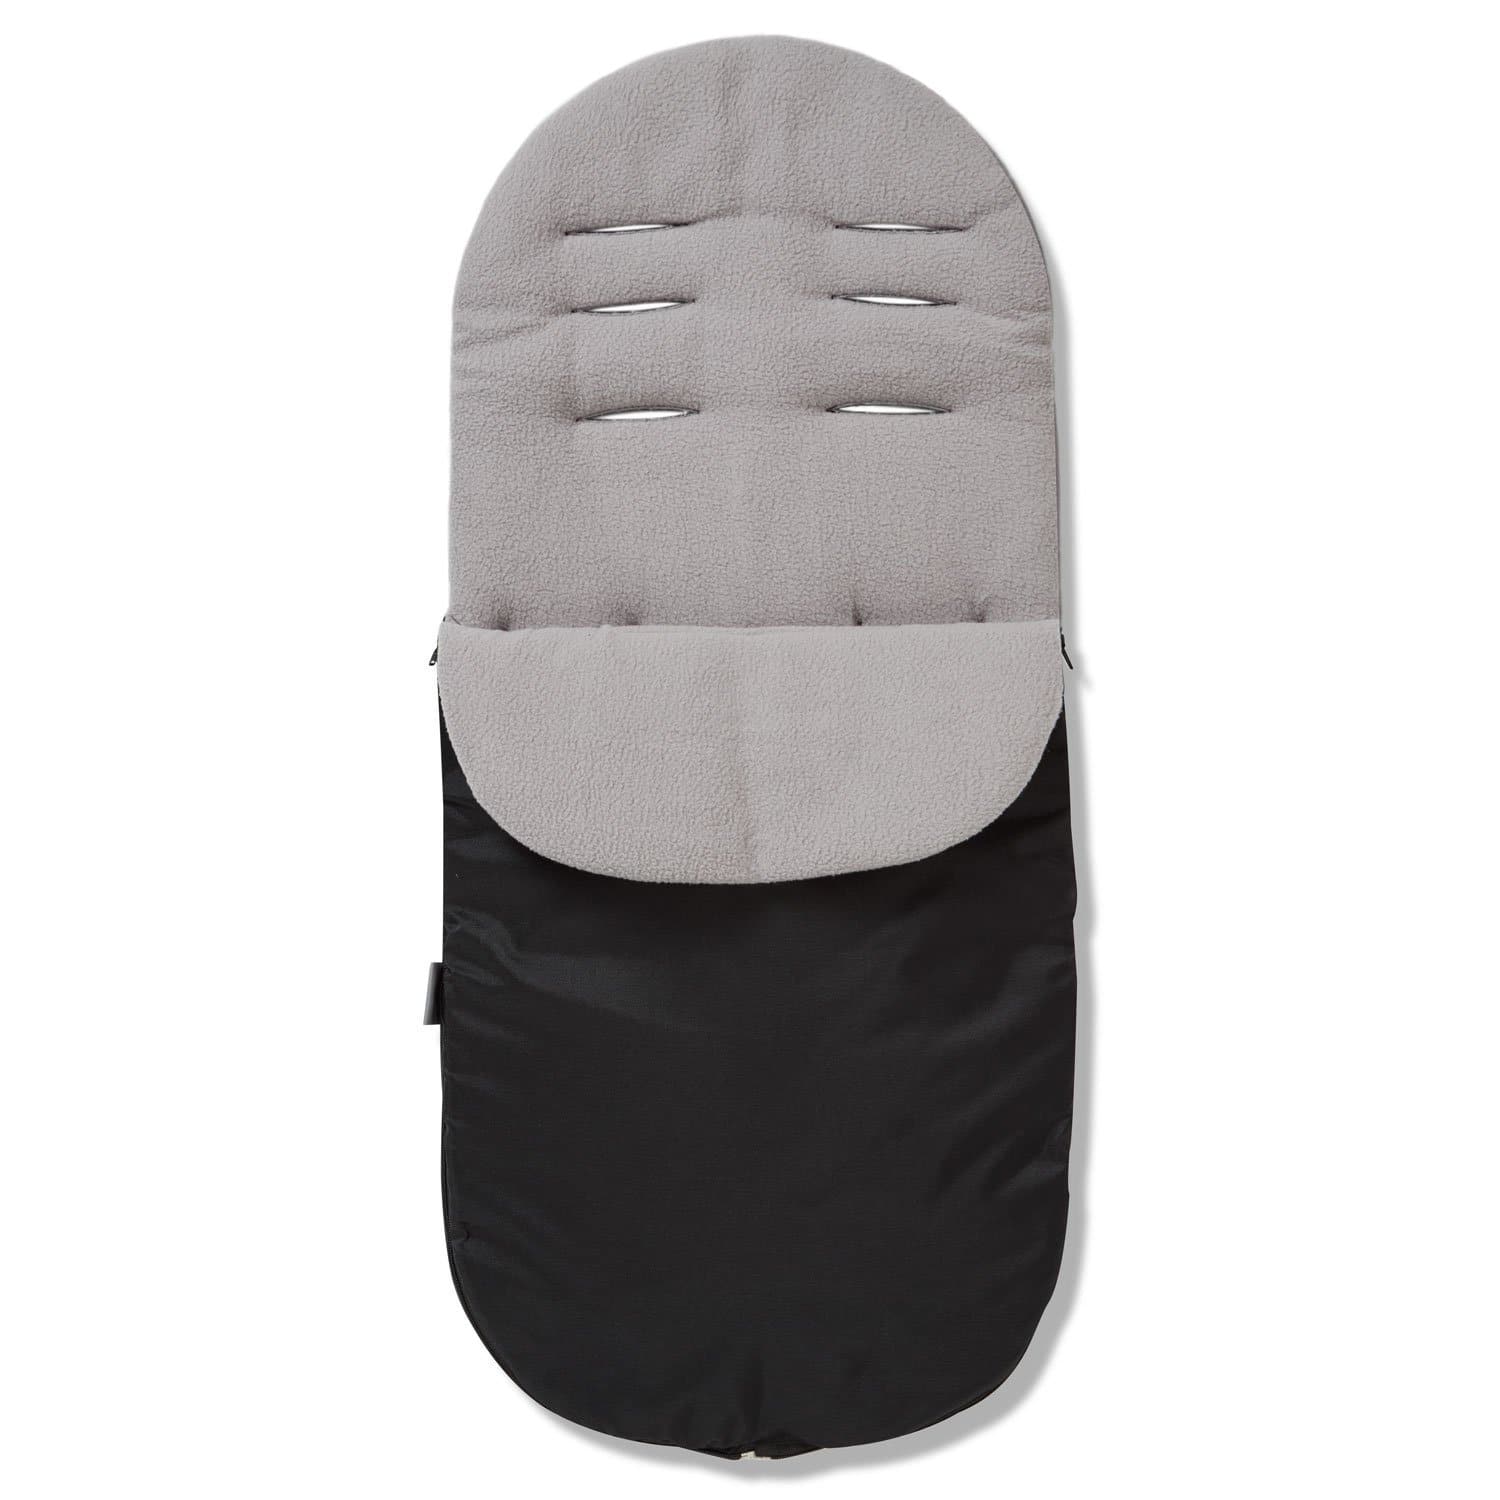 Footmuff / Cosy Toes Compatible with Bebe 9 - Grey / Fits All Models | For Your Little One